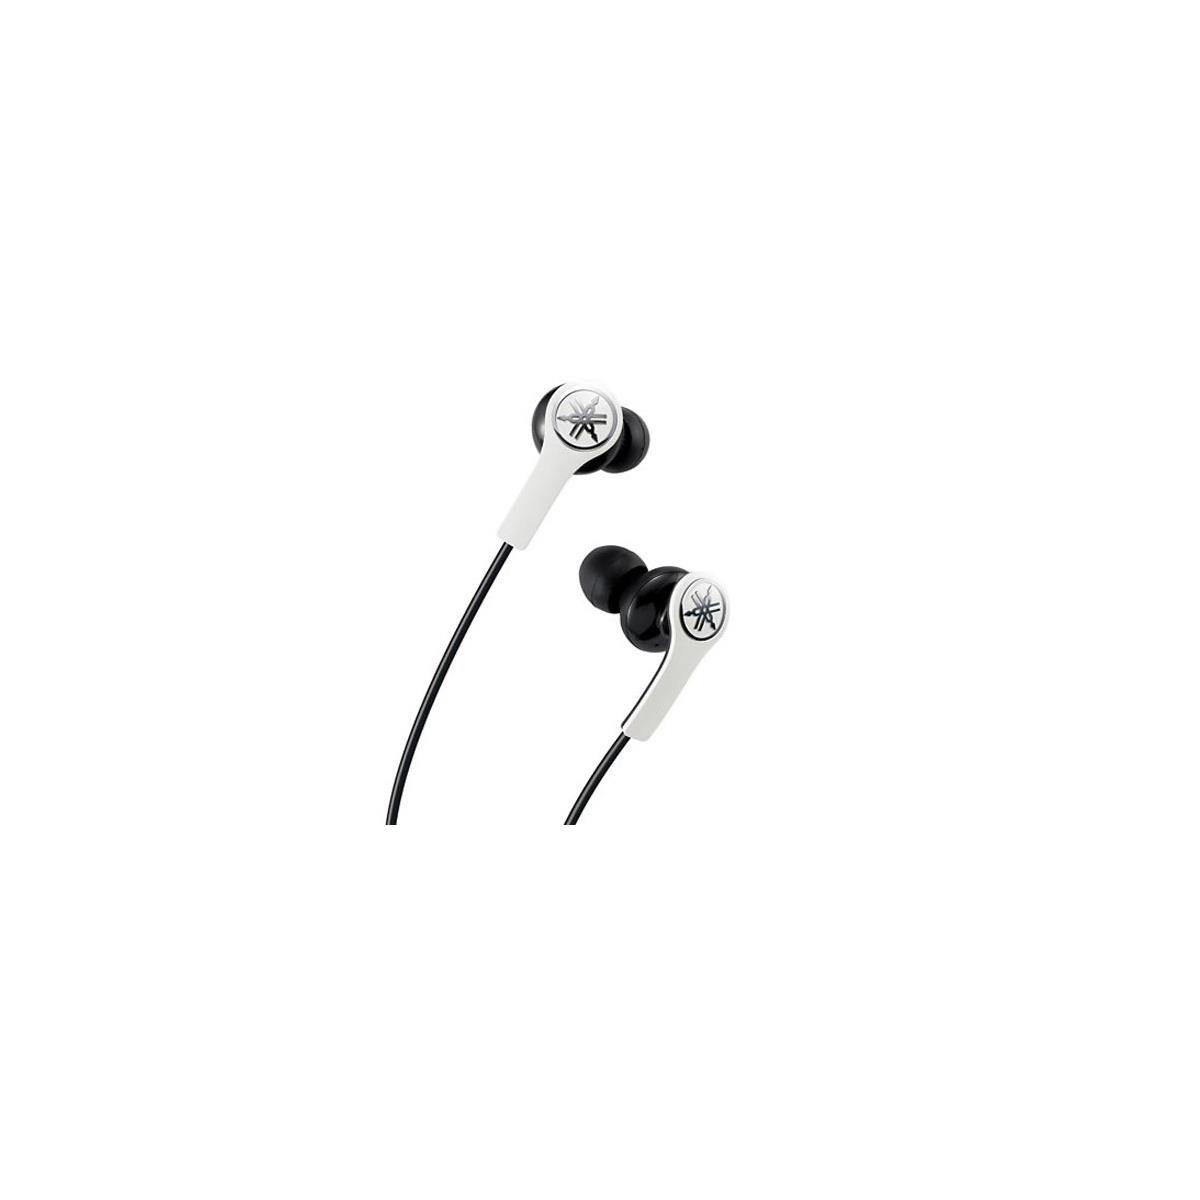 Image of Yamaha EPH-M100WH 30mW High-Performance Earphones with Remote and Mic